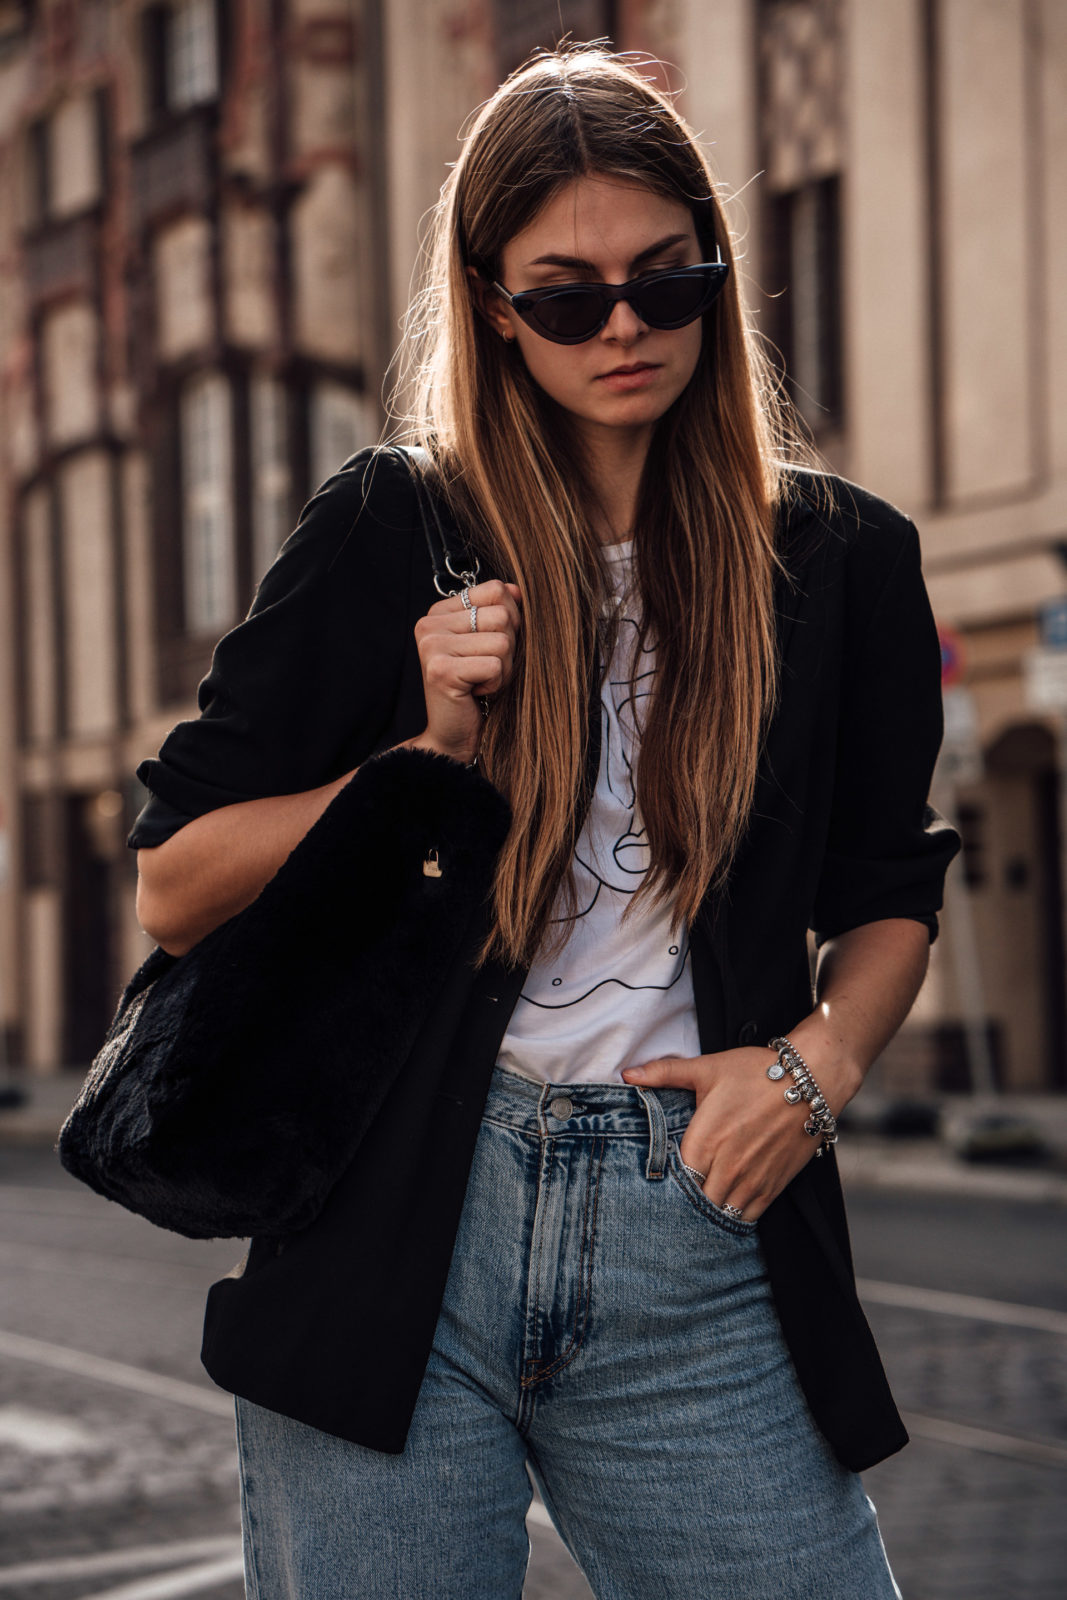 Casual Chic Autumn Outfit: Baggy Pants and Blazer || Fashionblog Berlin